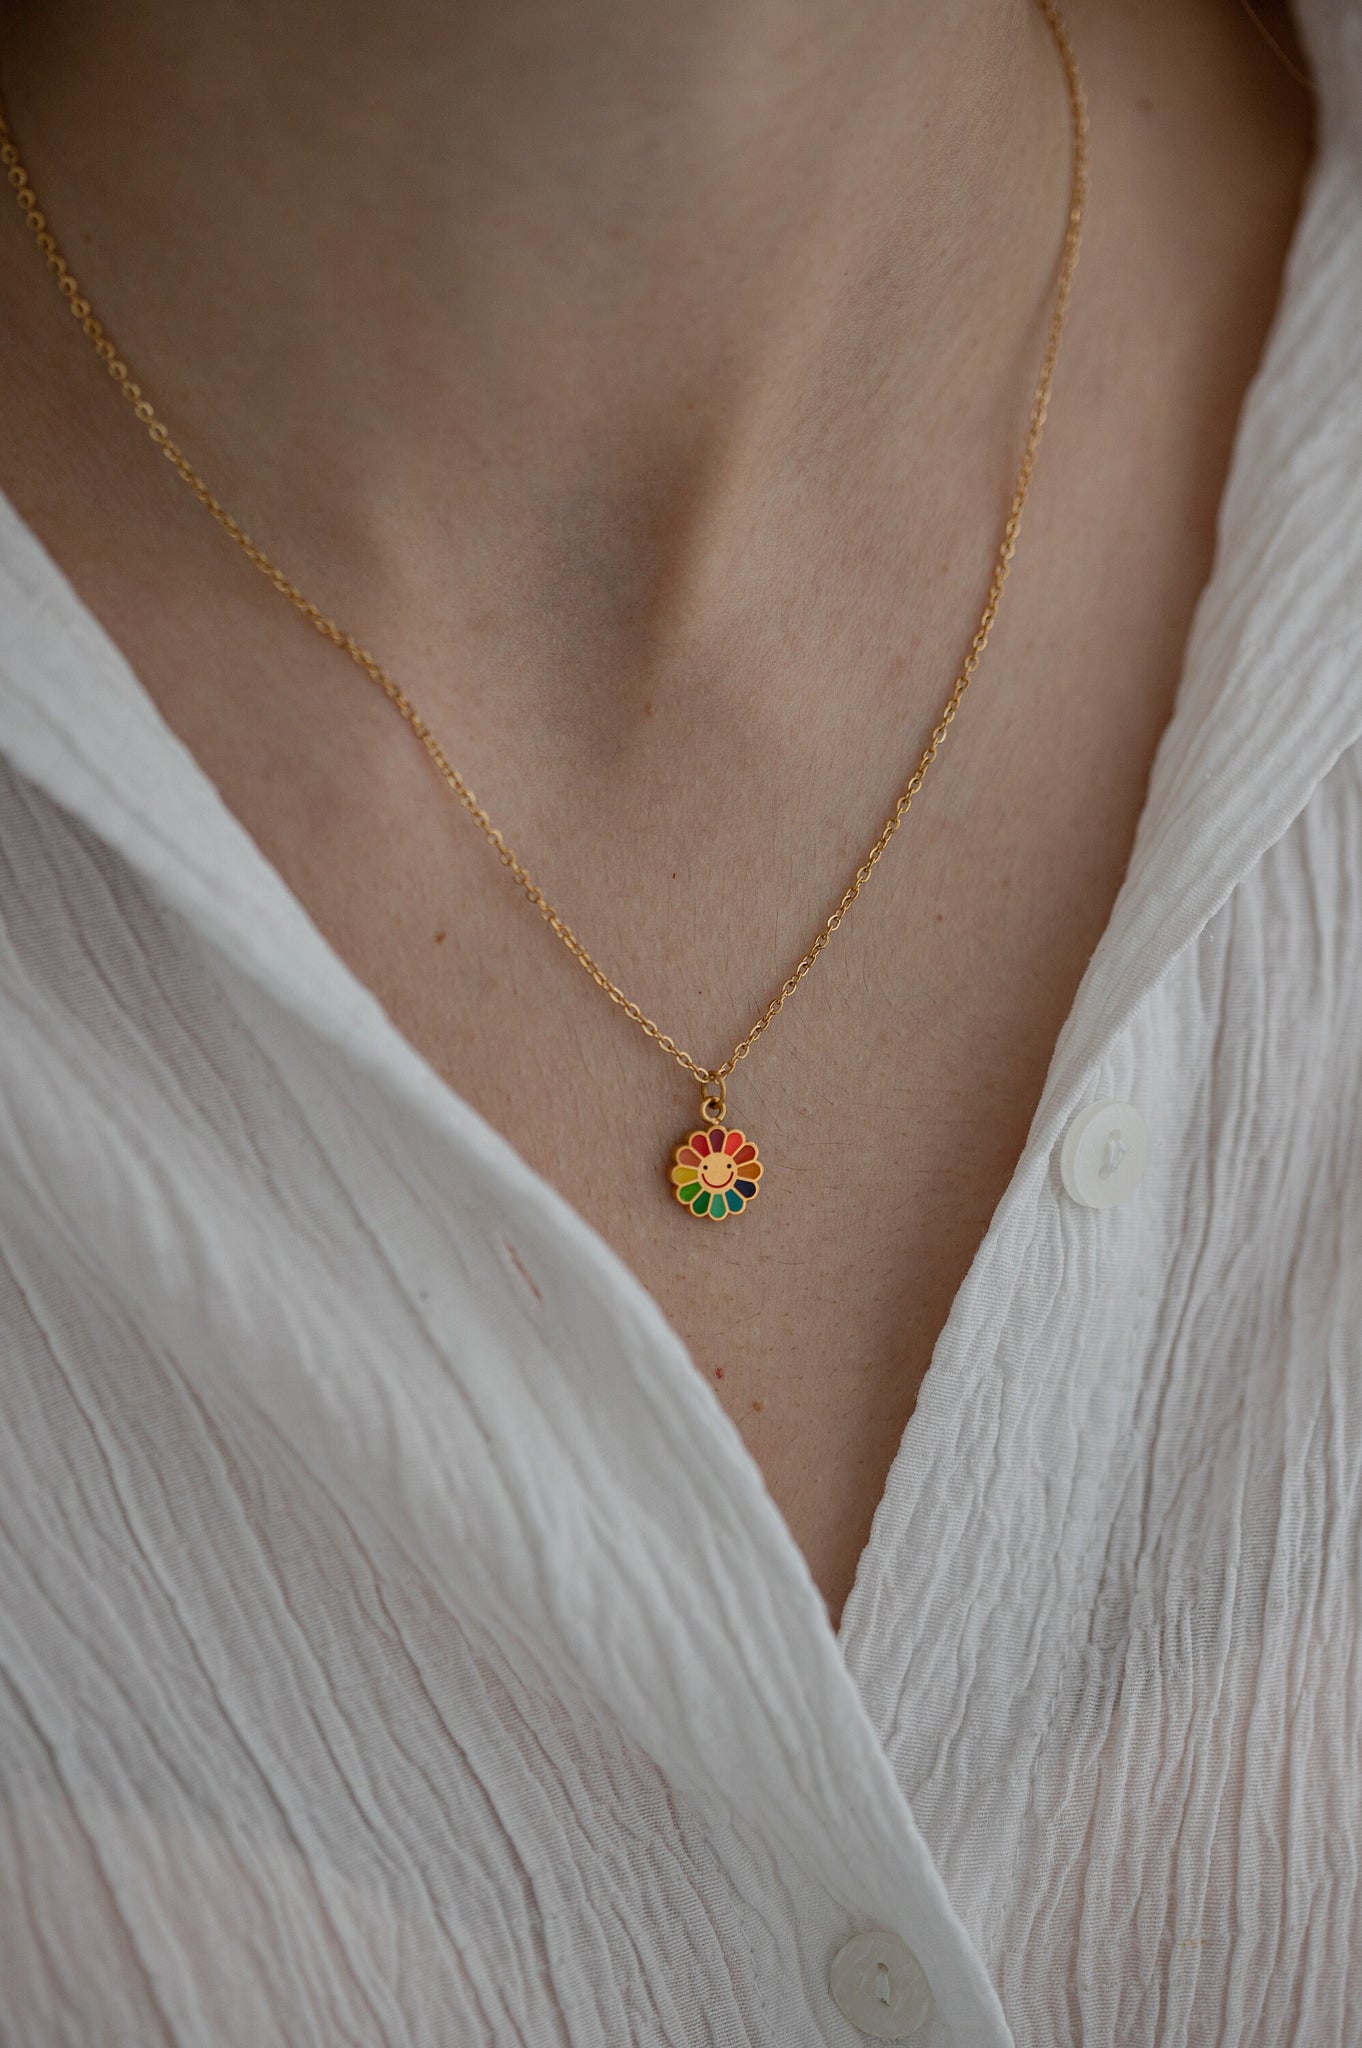 Colorful Sunflower Necklace, 18K Gold Necklace, Gift For Her, Laughing Sunflower Charm, Minimalist Necklace, Summer Jewelry, Dainty Necklace